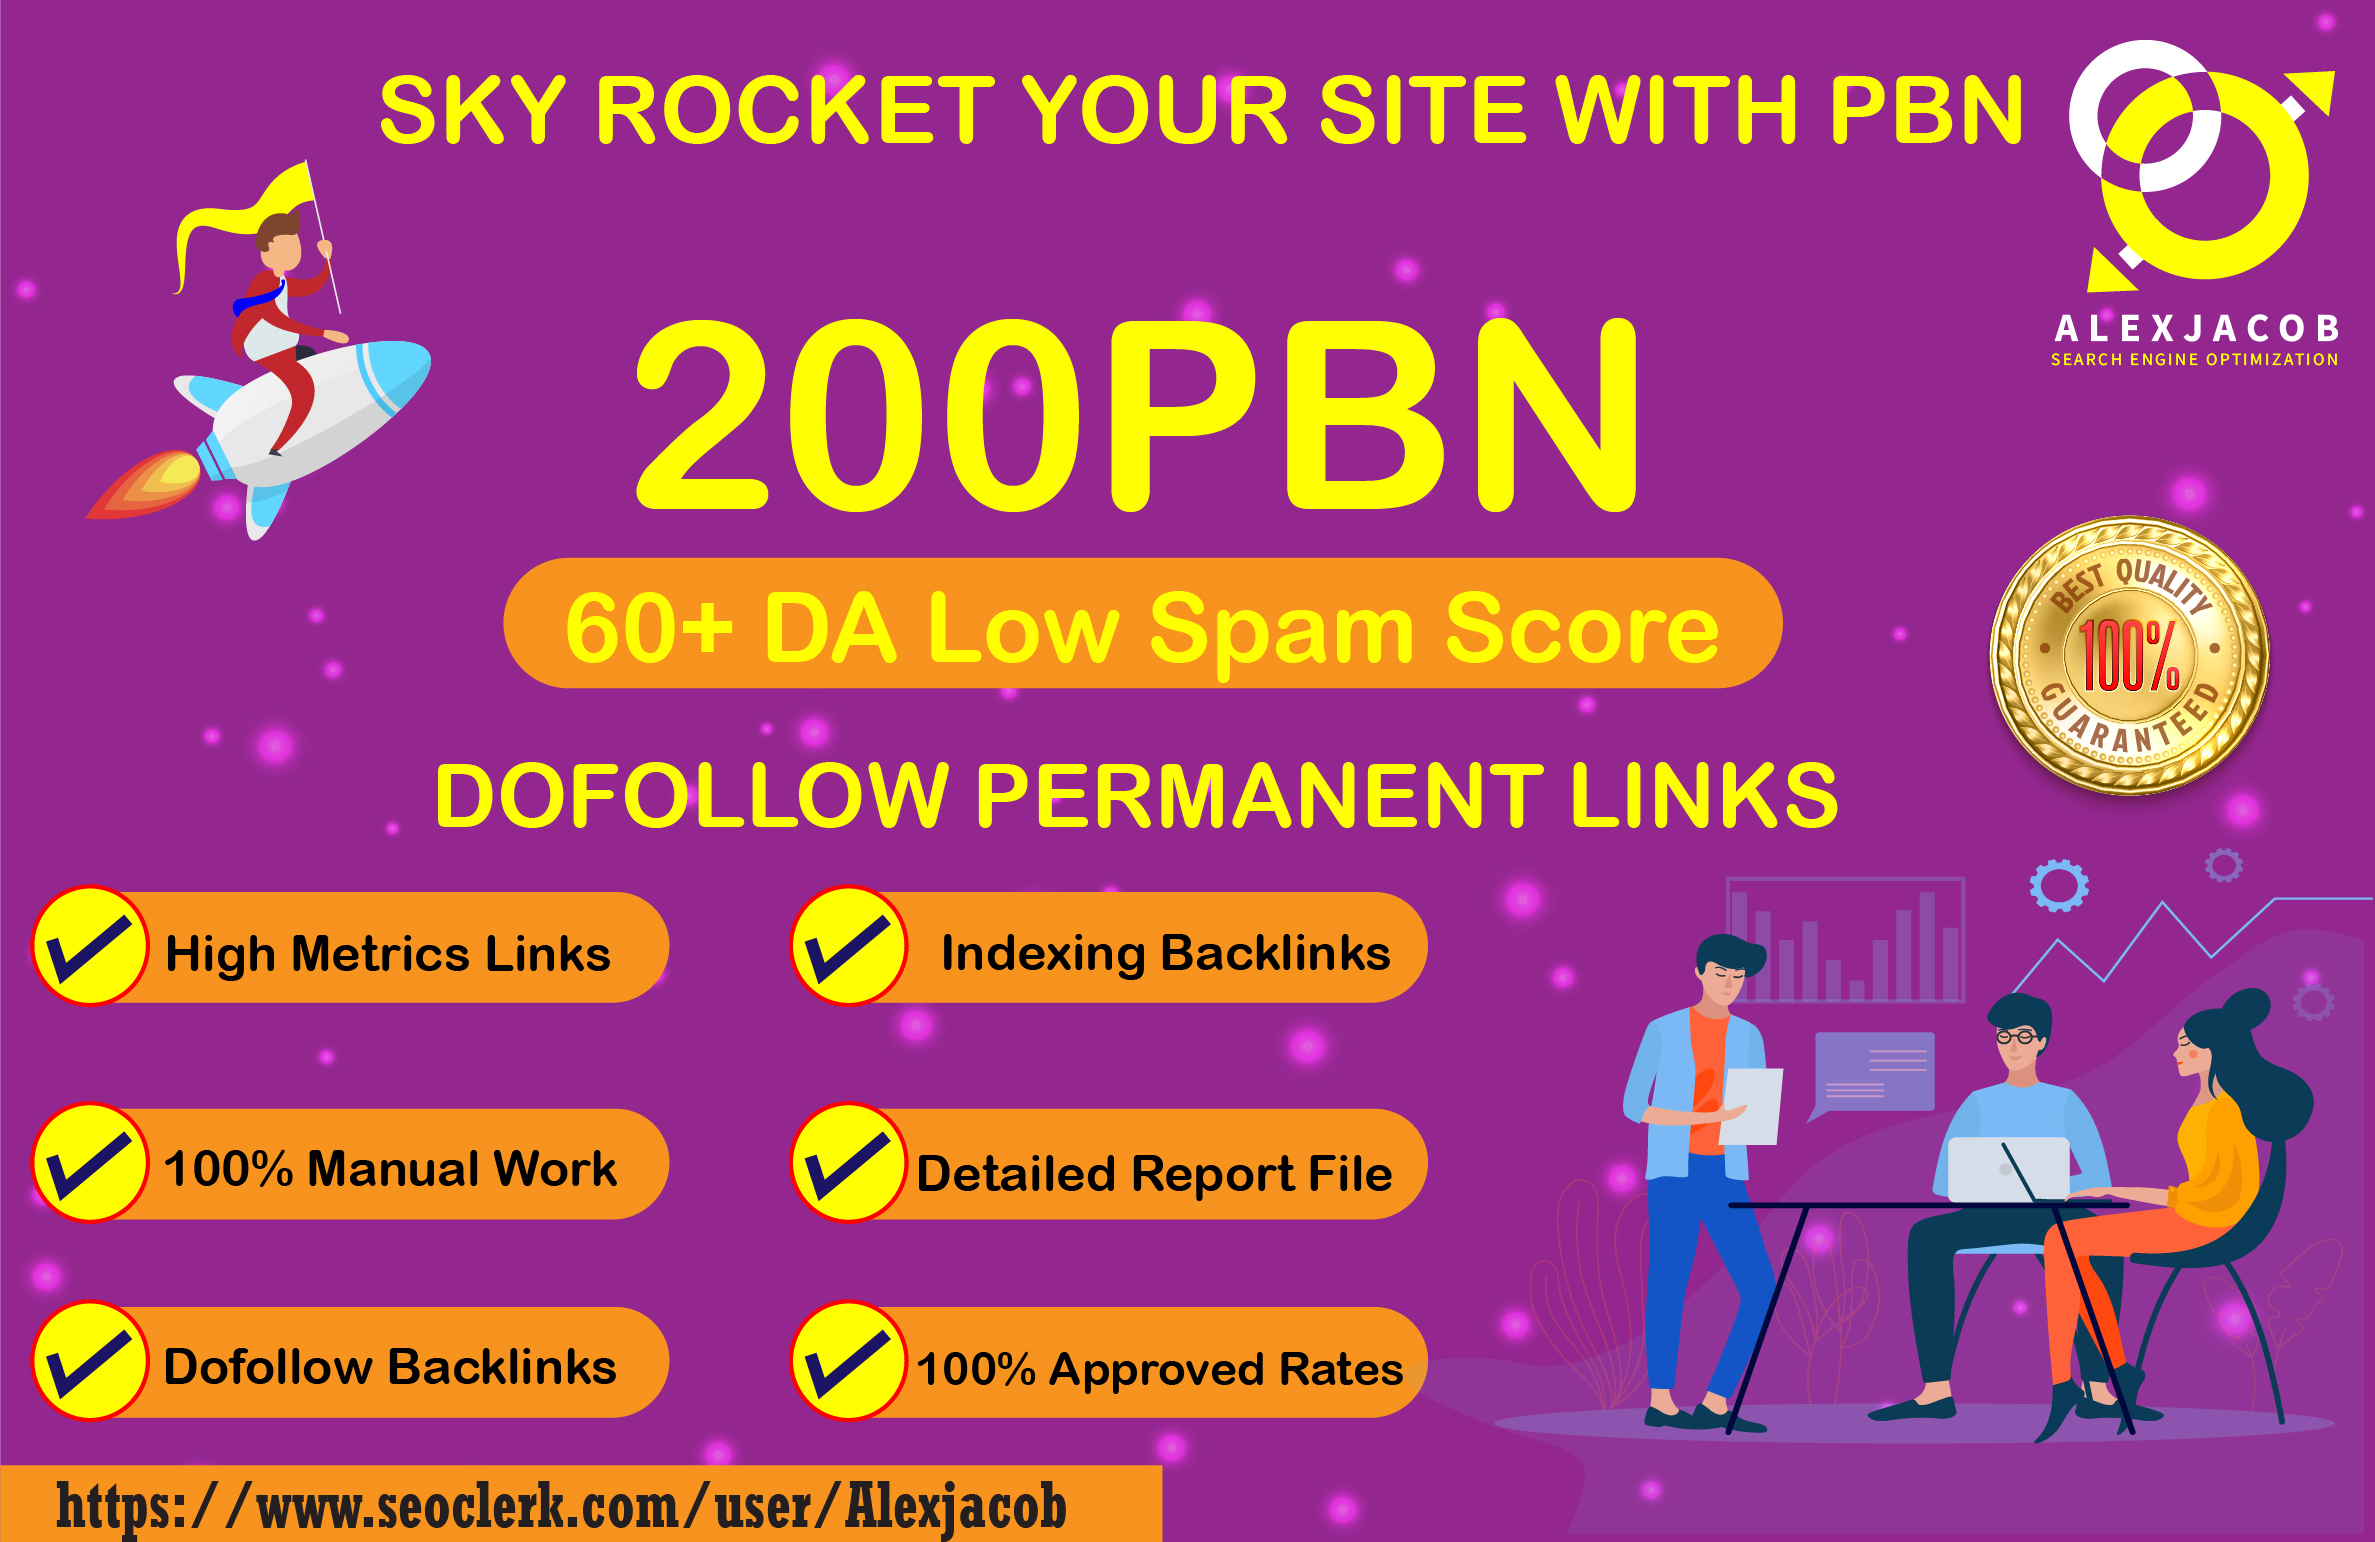 UItimate 200 PBN on Casino Thai Korean top sites with DA60+ And low spam score dofollow backlinks